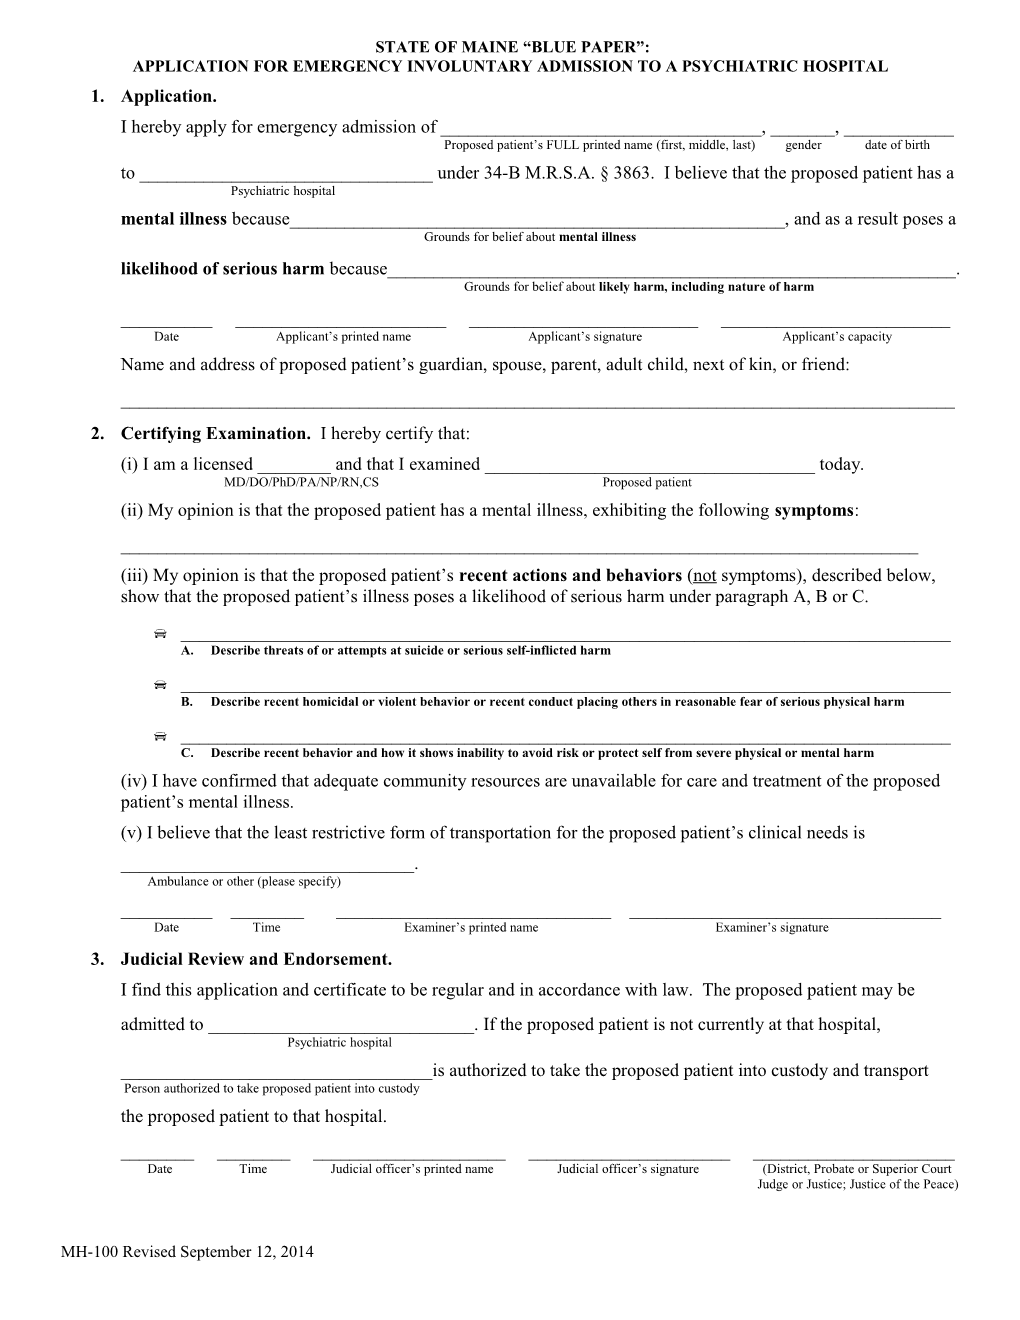 Application for Emergency Involuntary Admission to a Psychiatric Hospital